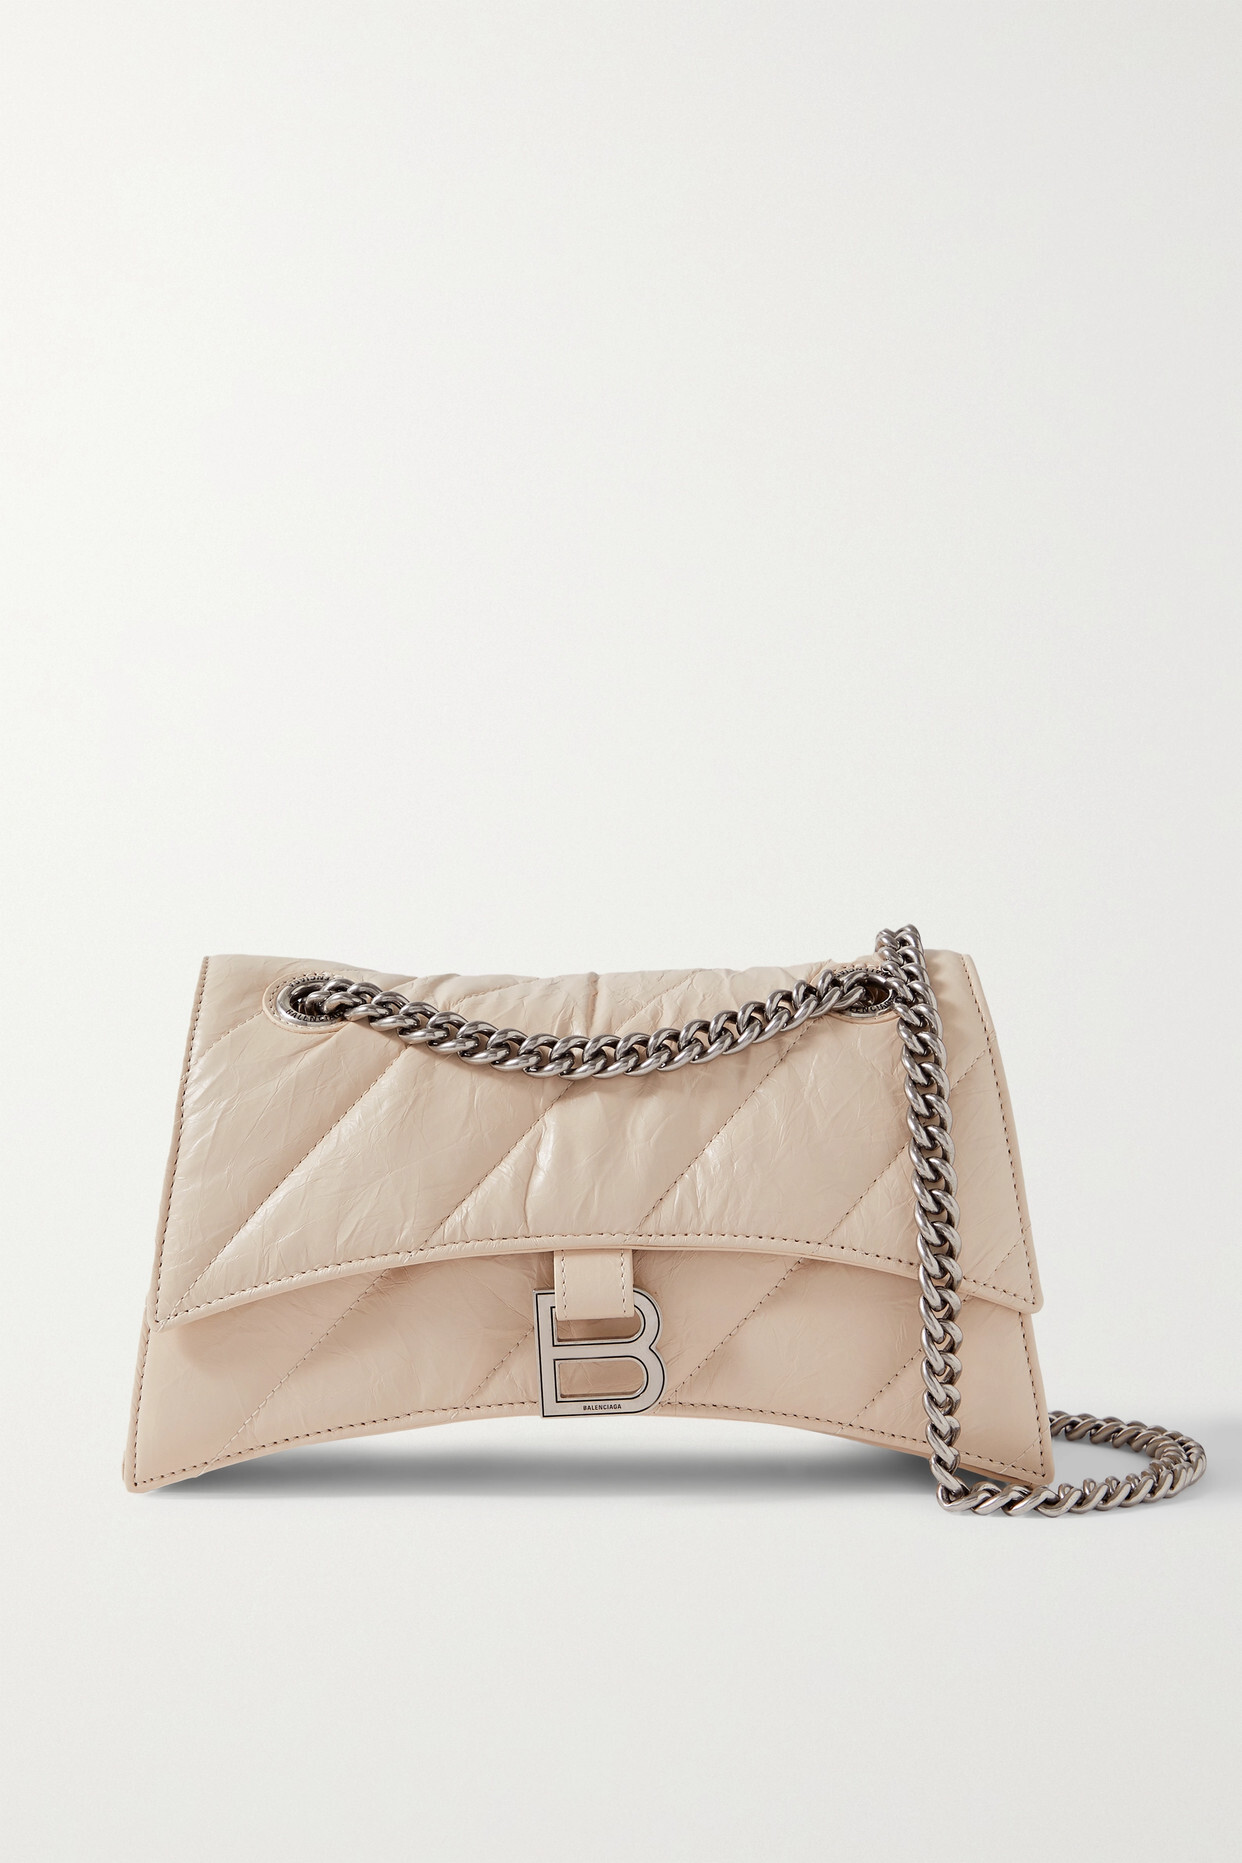 Balenciaga - Crush Small Quilted Crinkled-leather Shoulder Bag - Neutrals